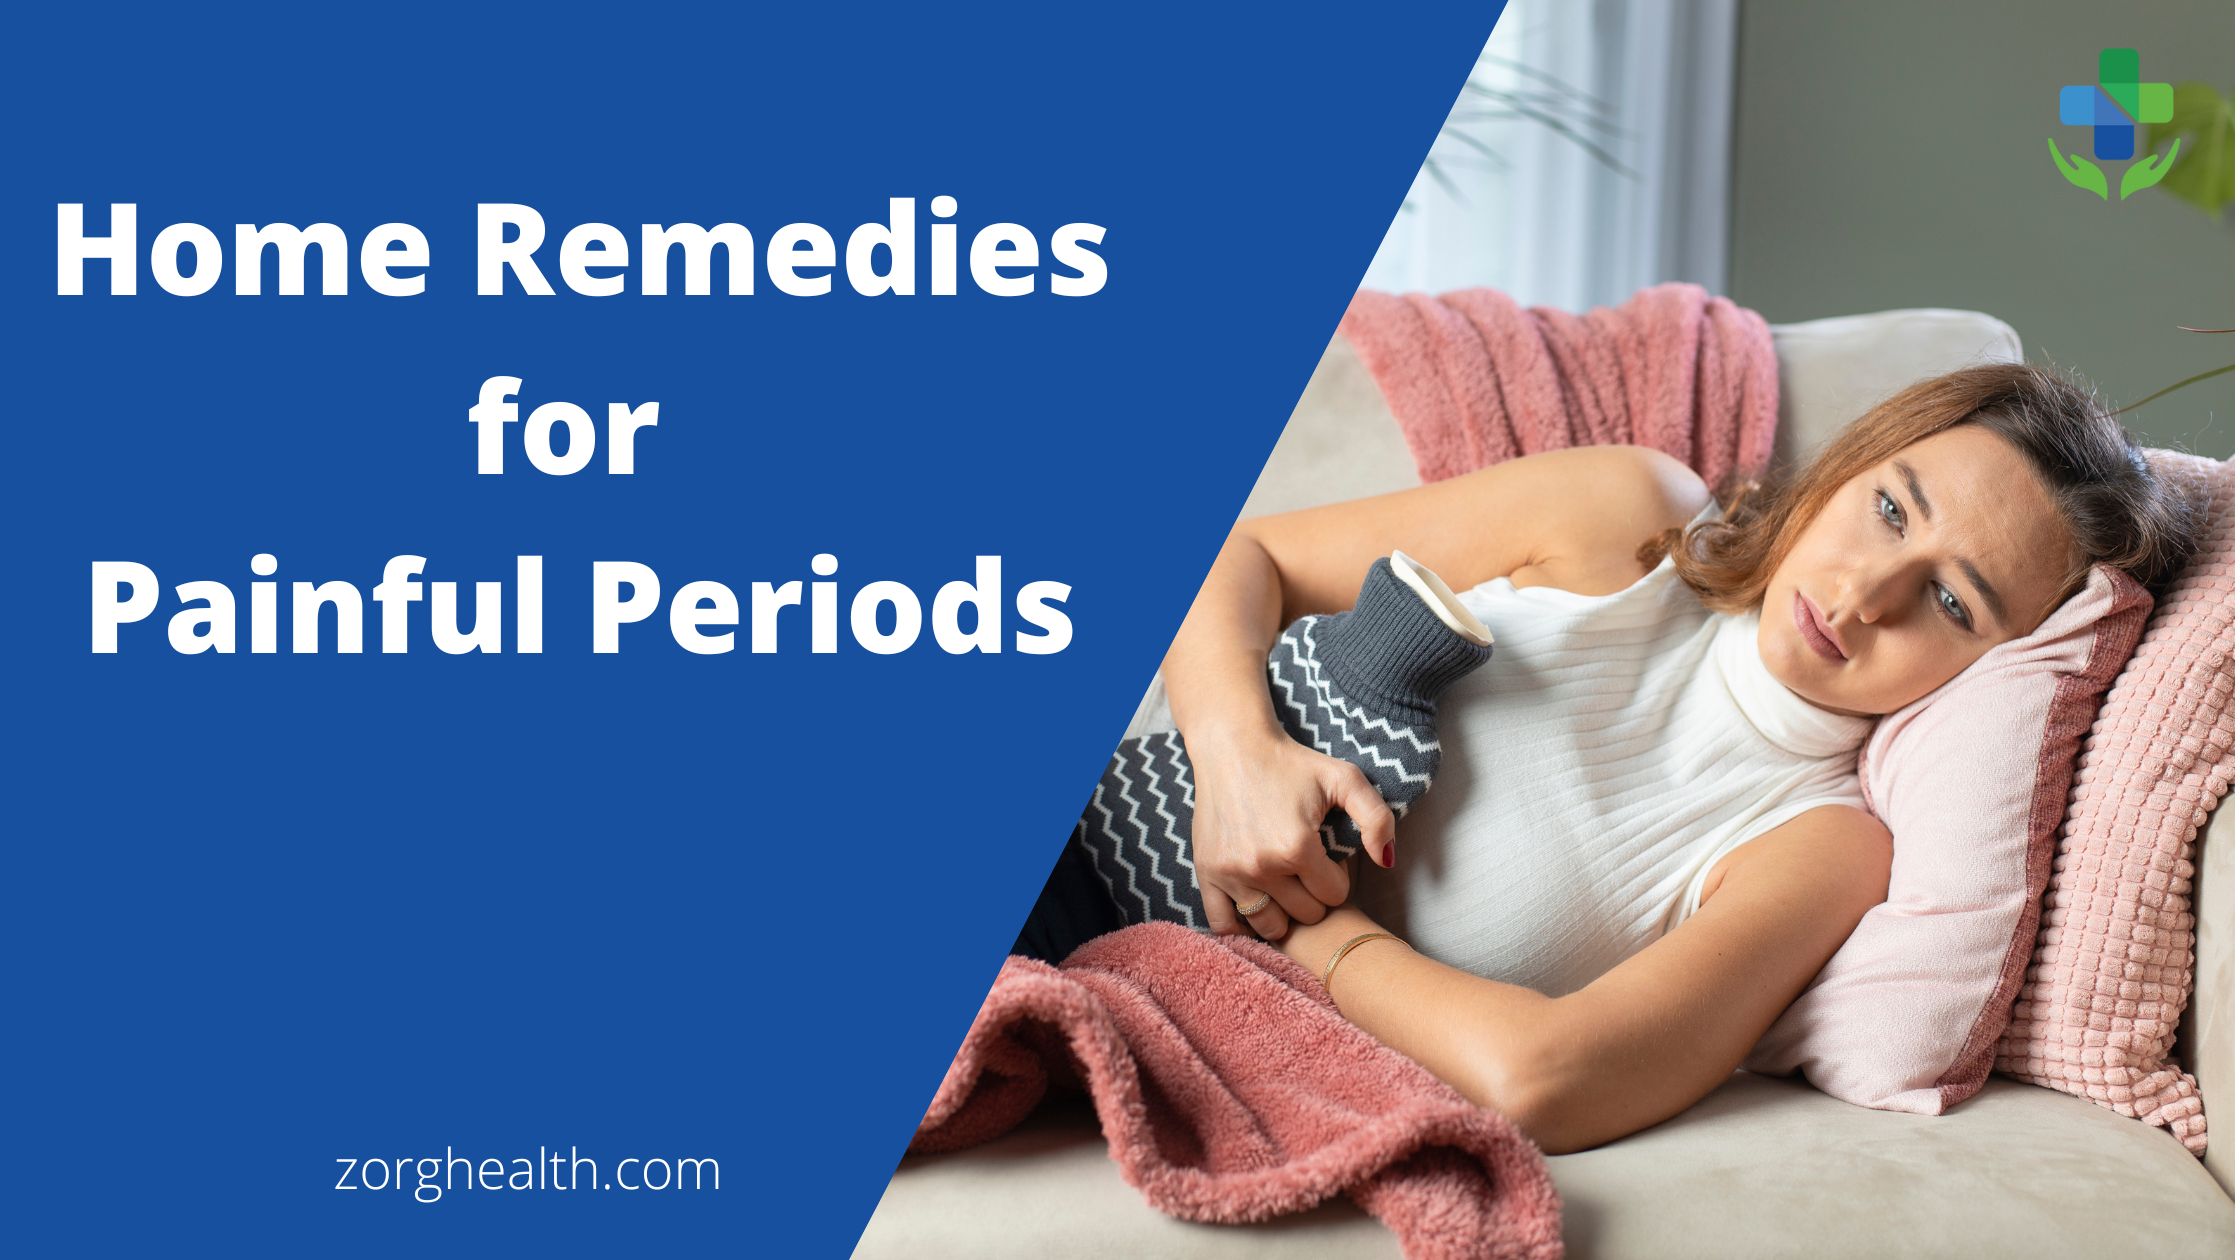 Home Remedies for Painful Periods